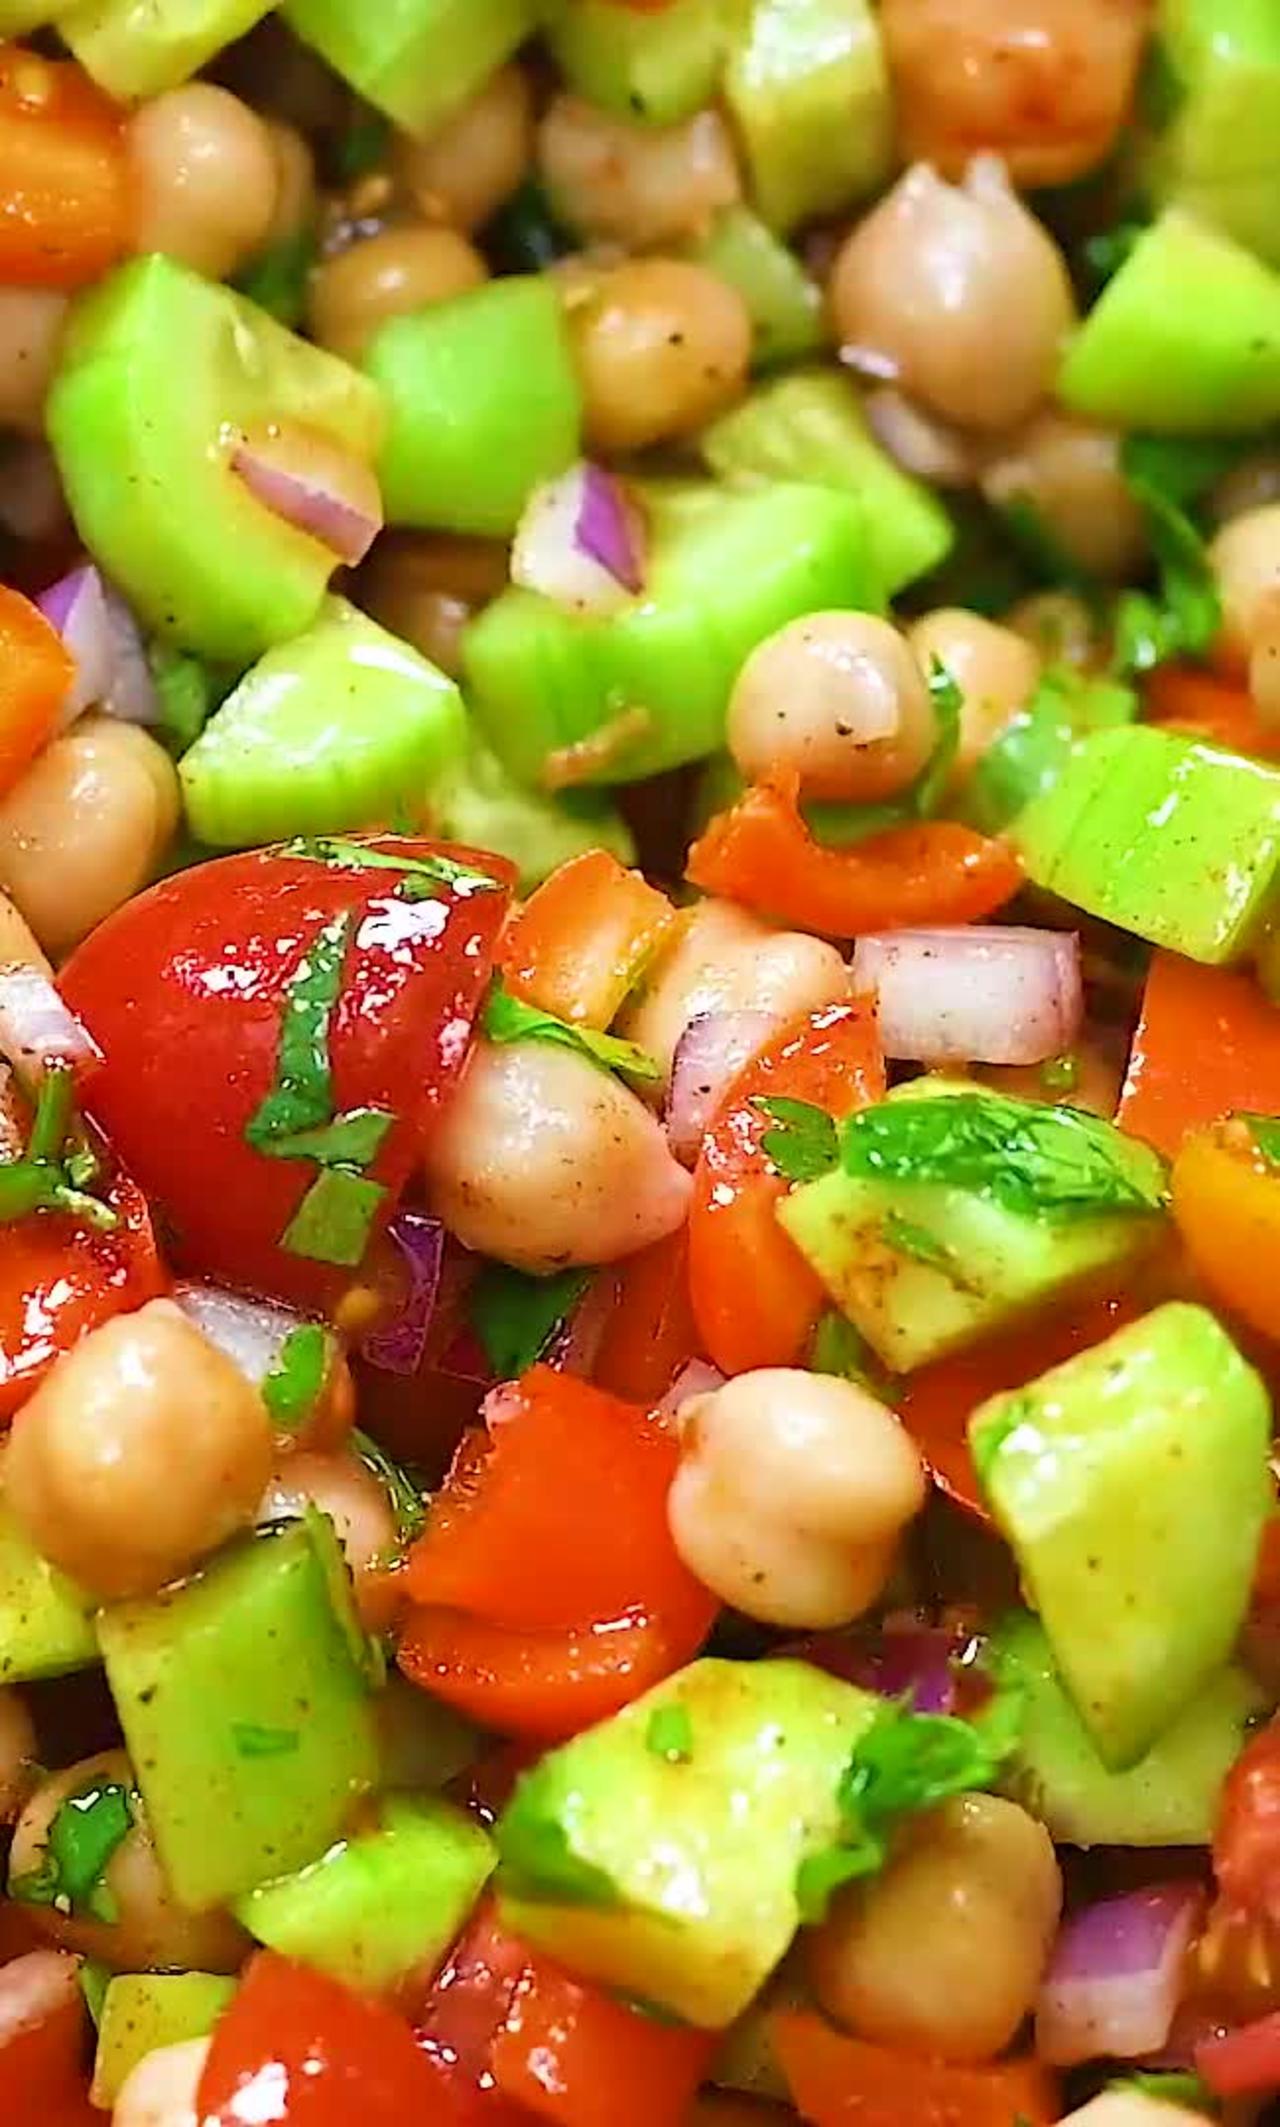 Chickpea salad for weight loss transformation and motivation